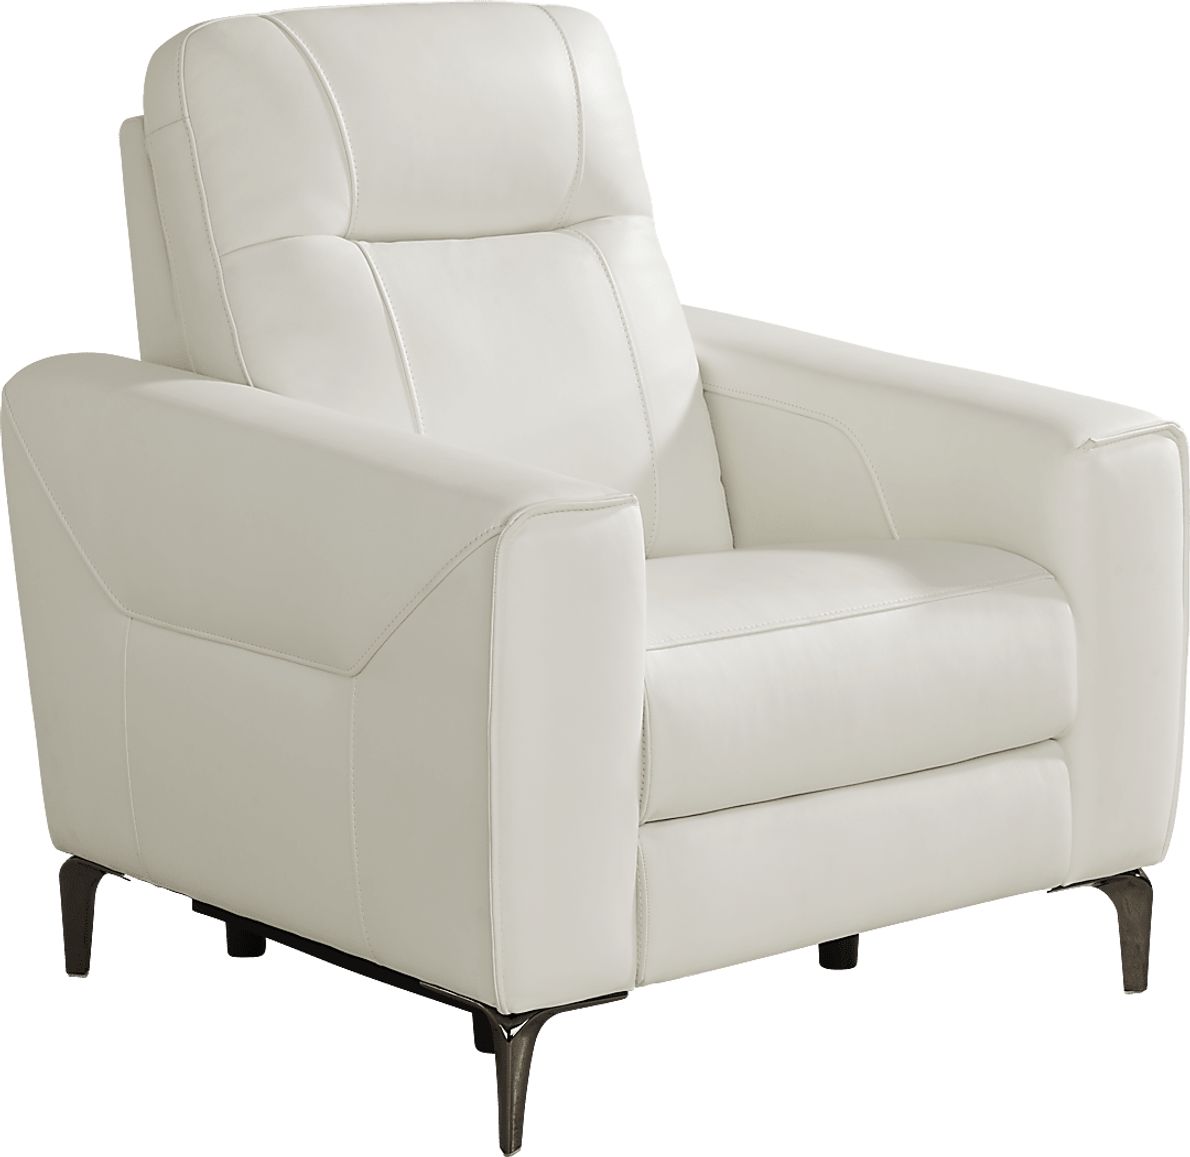 Parkside Heights Leather Dual Power Recliner